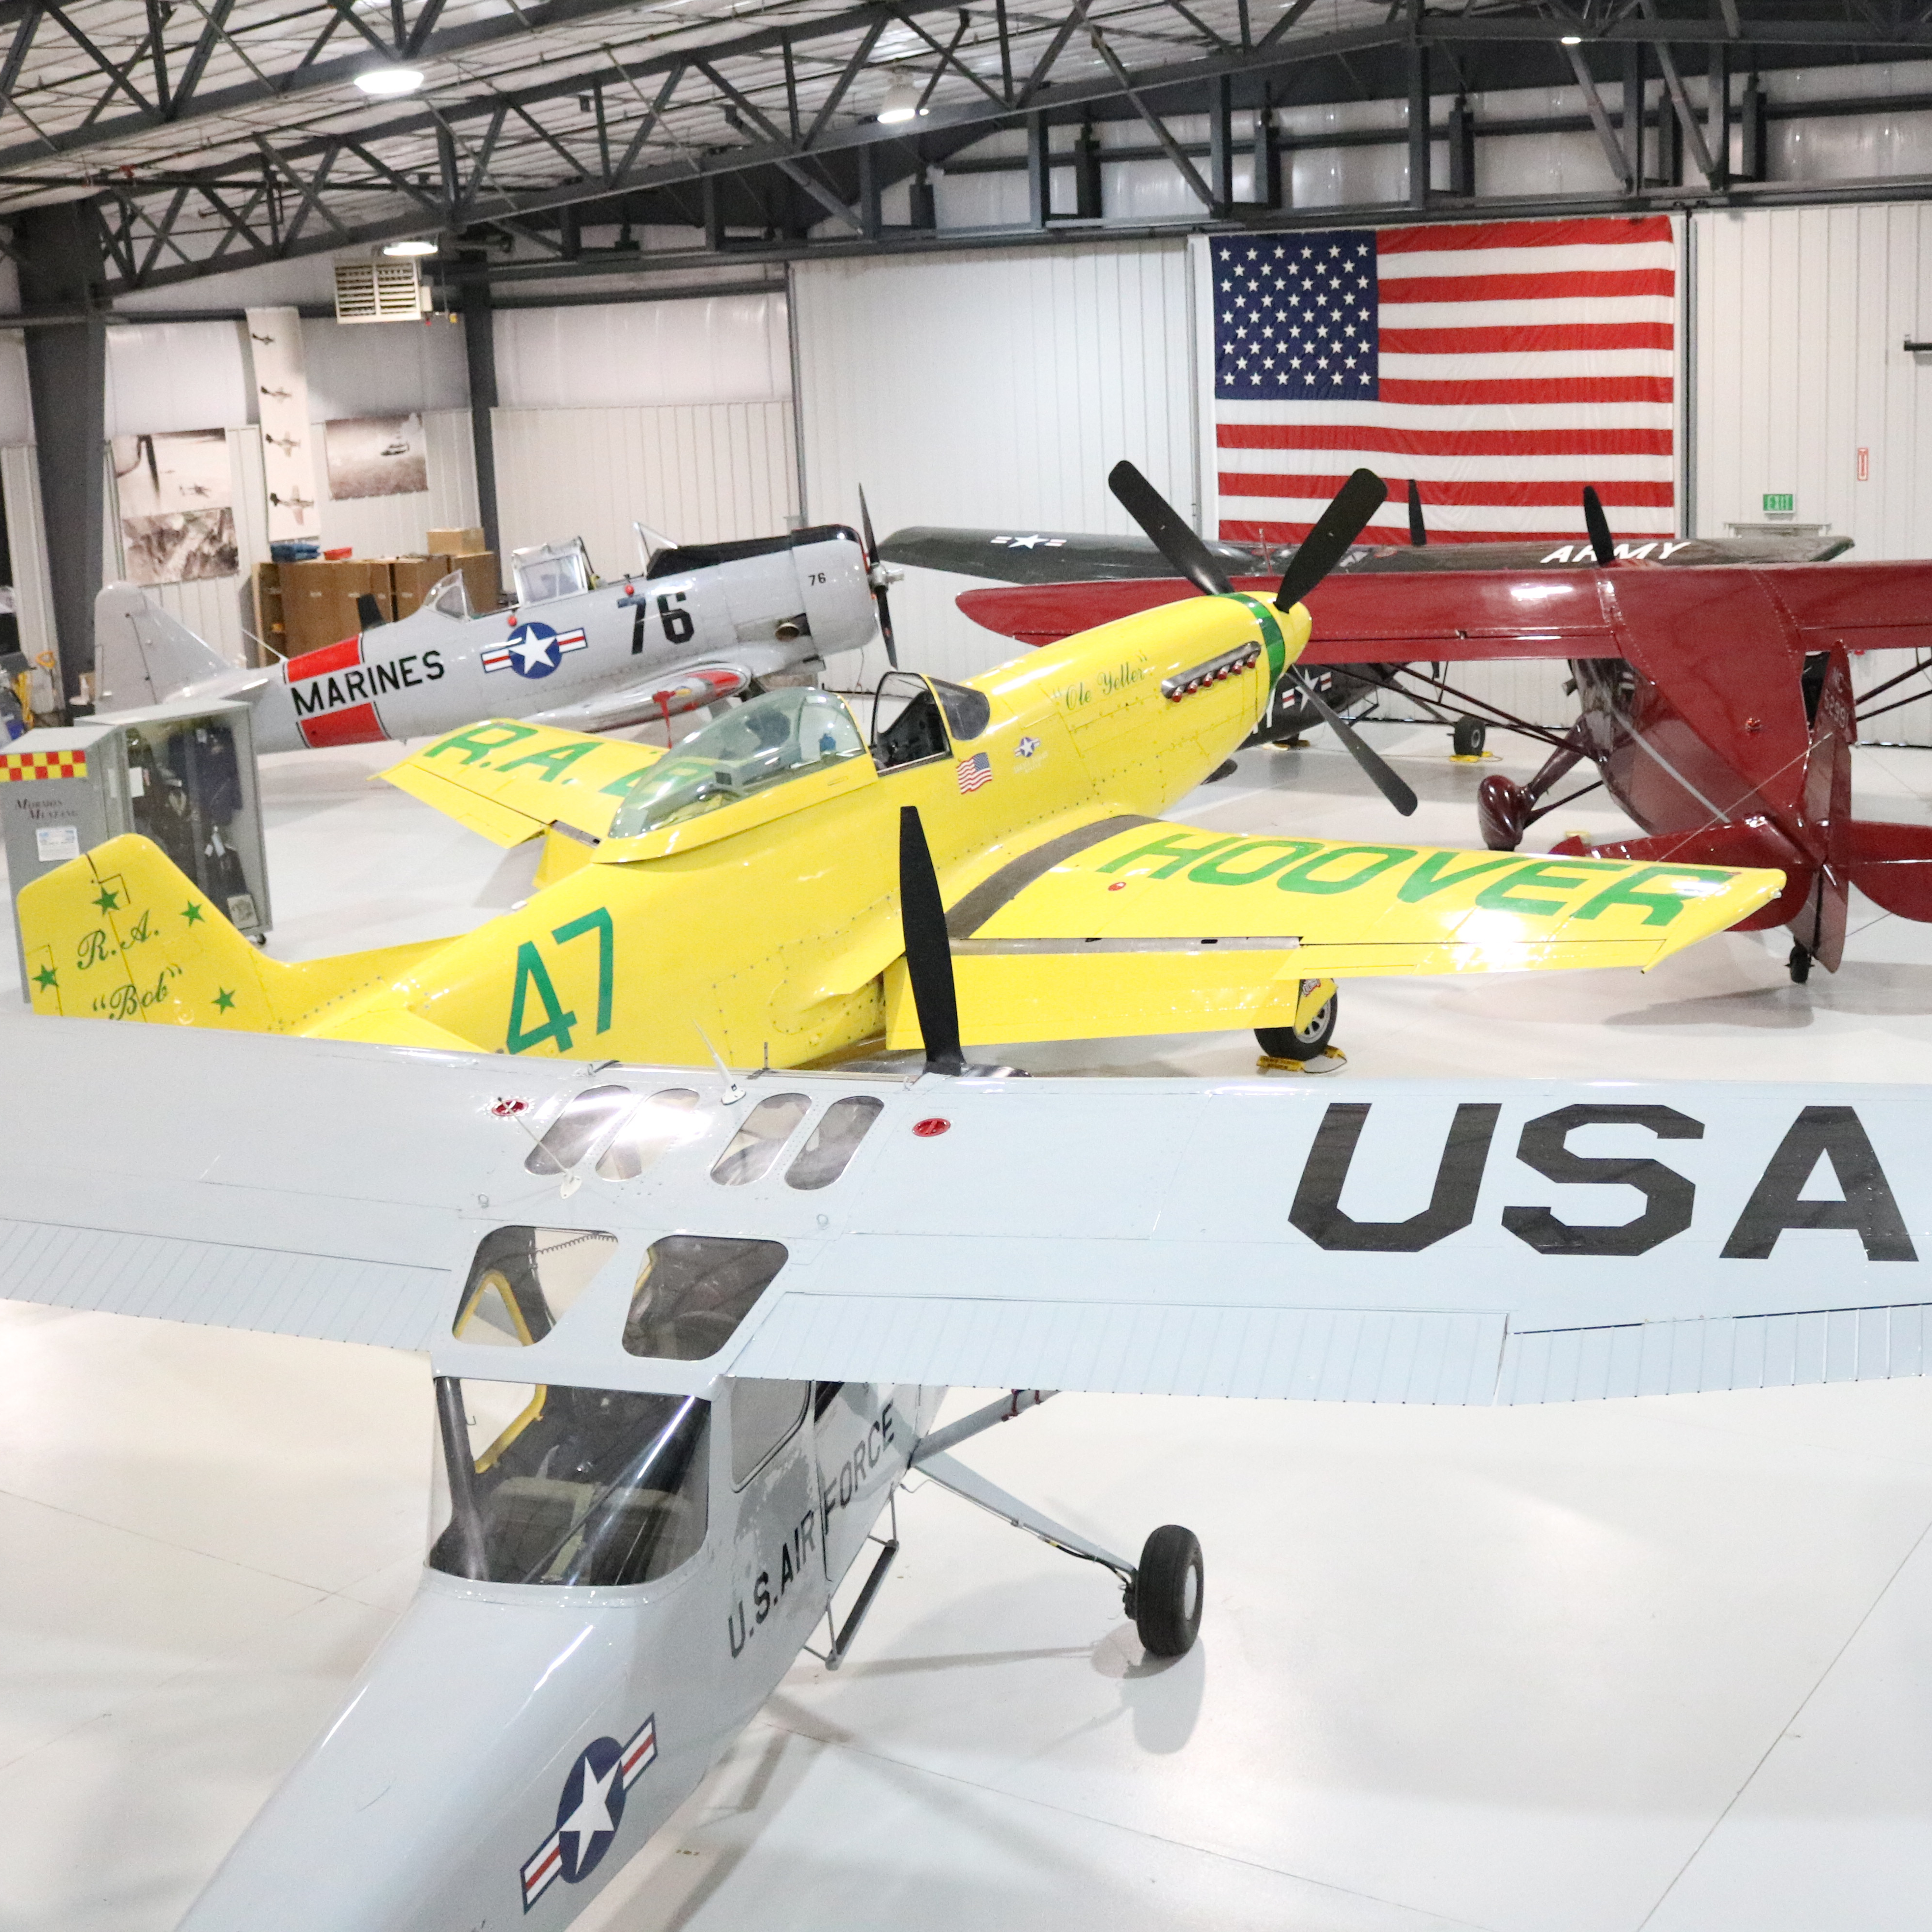 Image of 4 airplanes parked in the hanger that is the Legacy Flight Museum. American Flag on the wall in the background. 